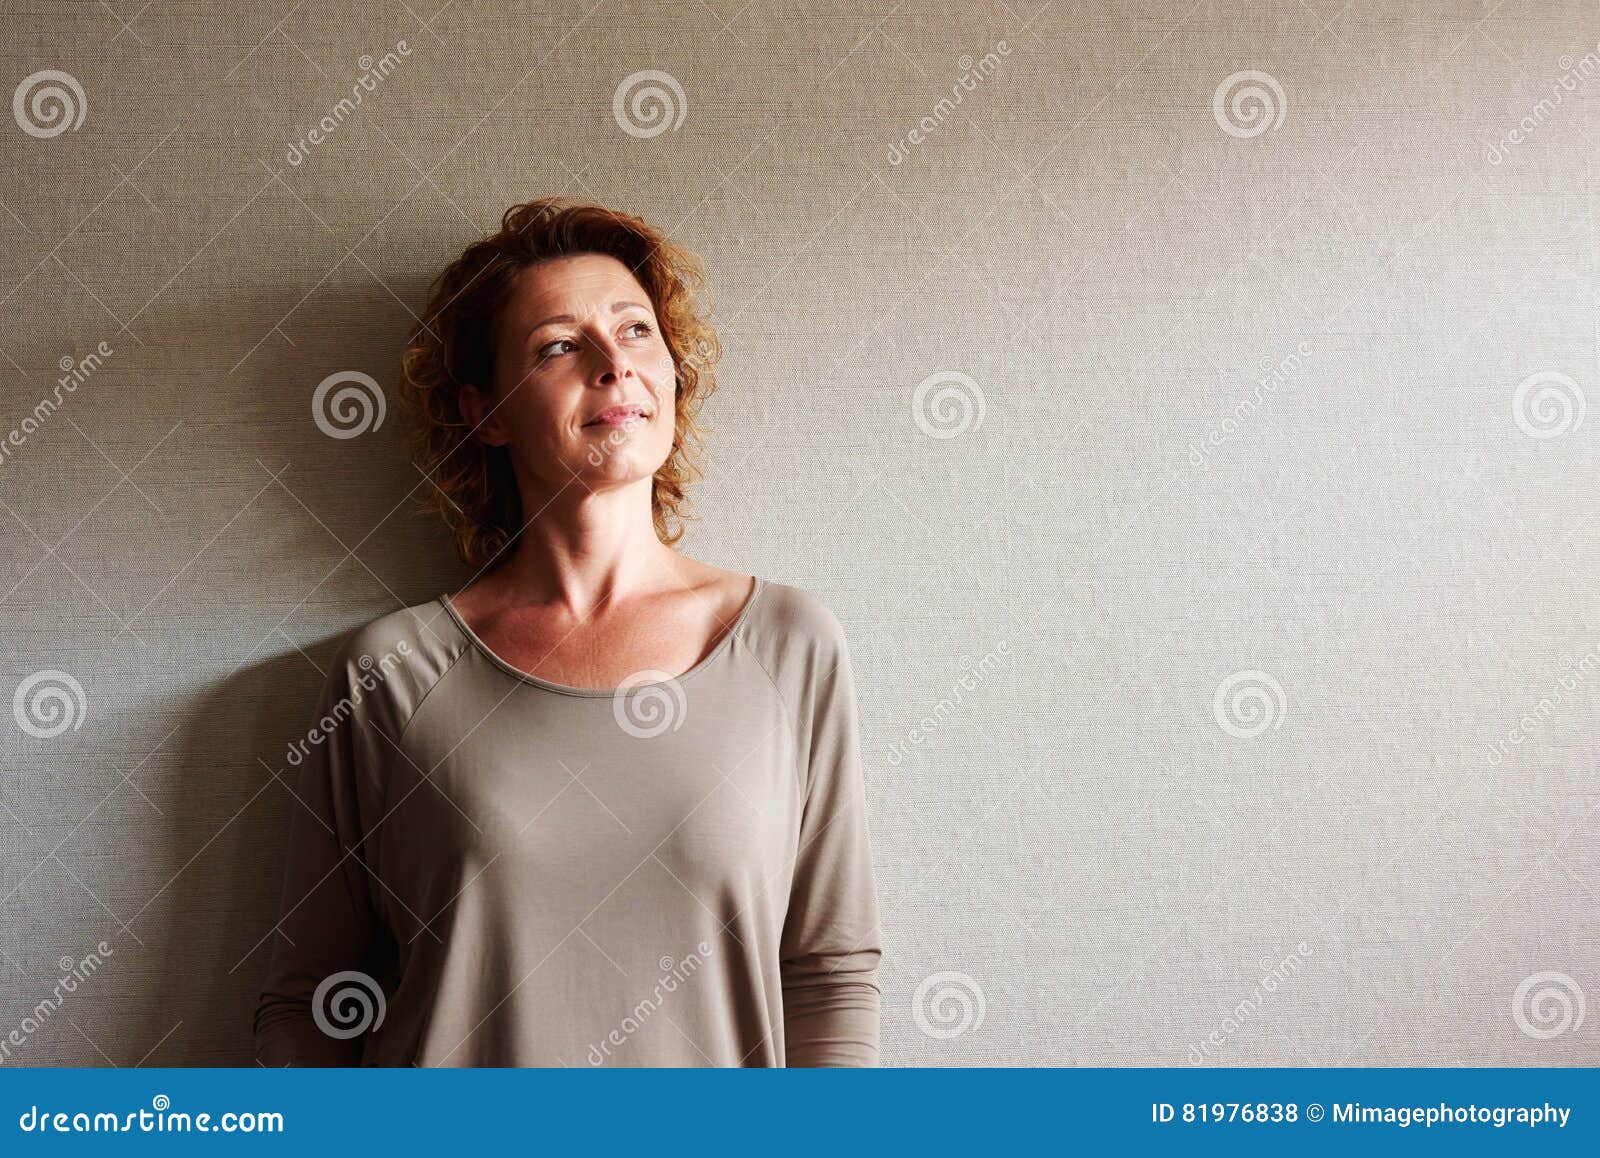 woman with curly hair leaning on wall in contemplation